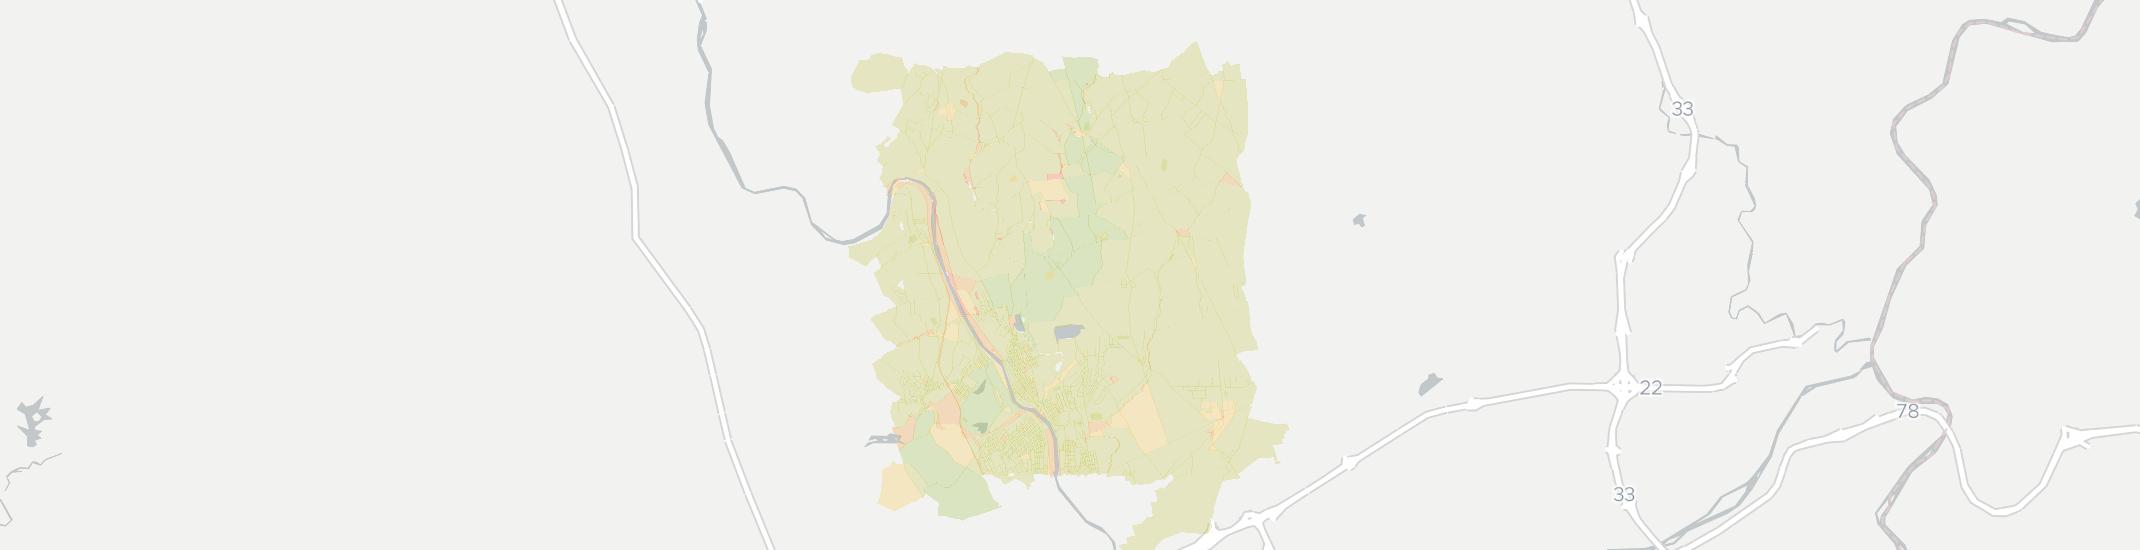 Northampton Internet Competition Map. Click for interactive map.